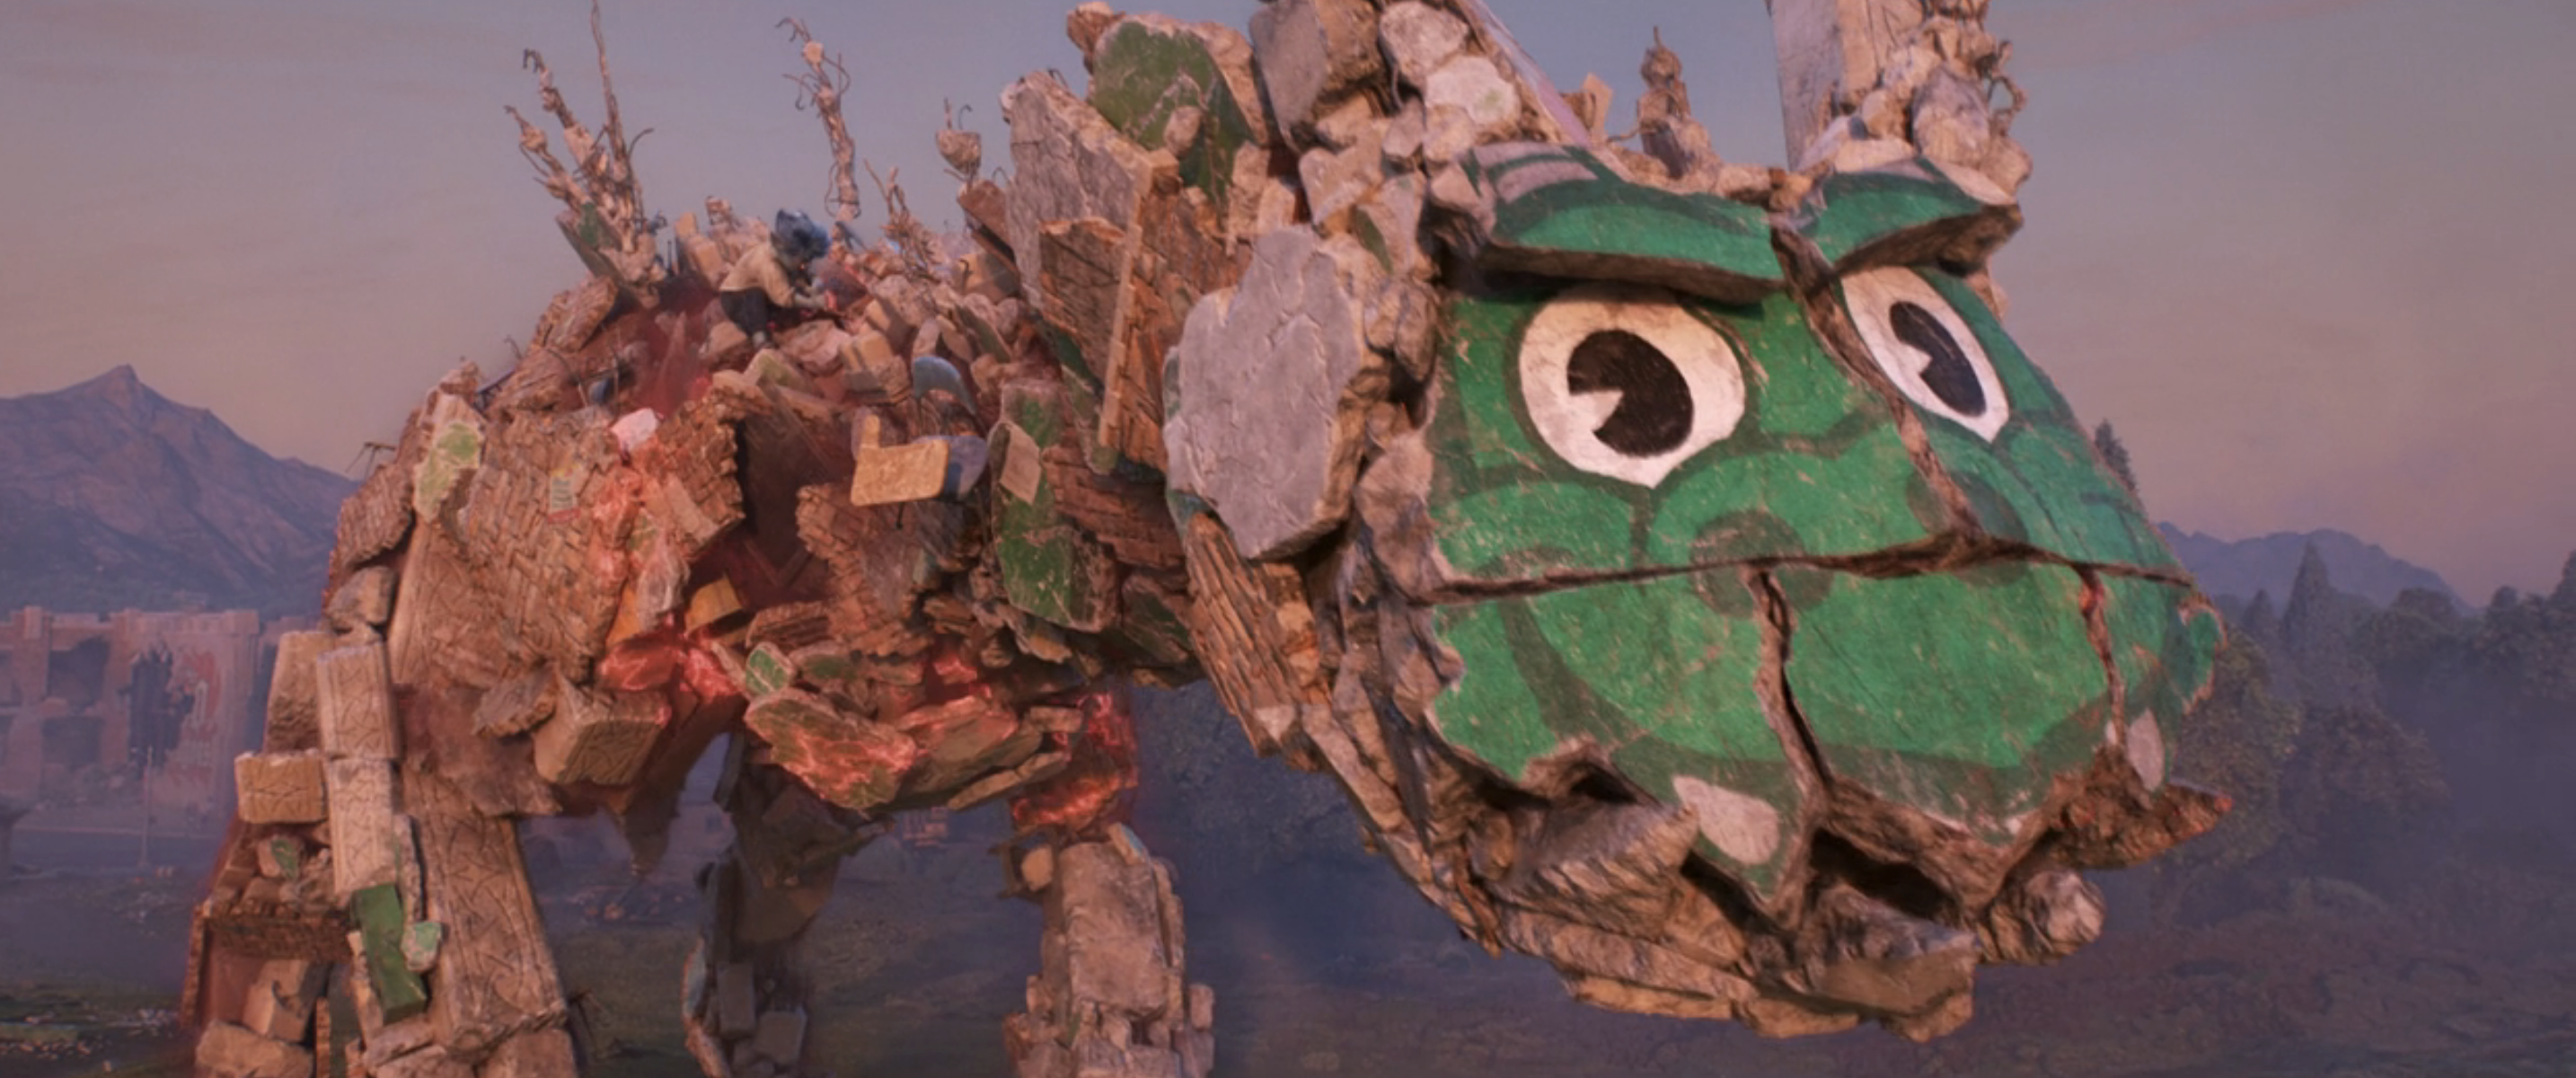 a large dragon made of debris with a stone high school mascot face